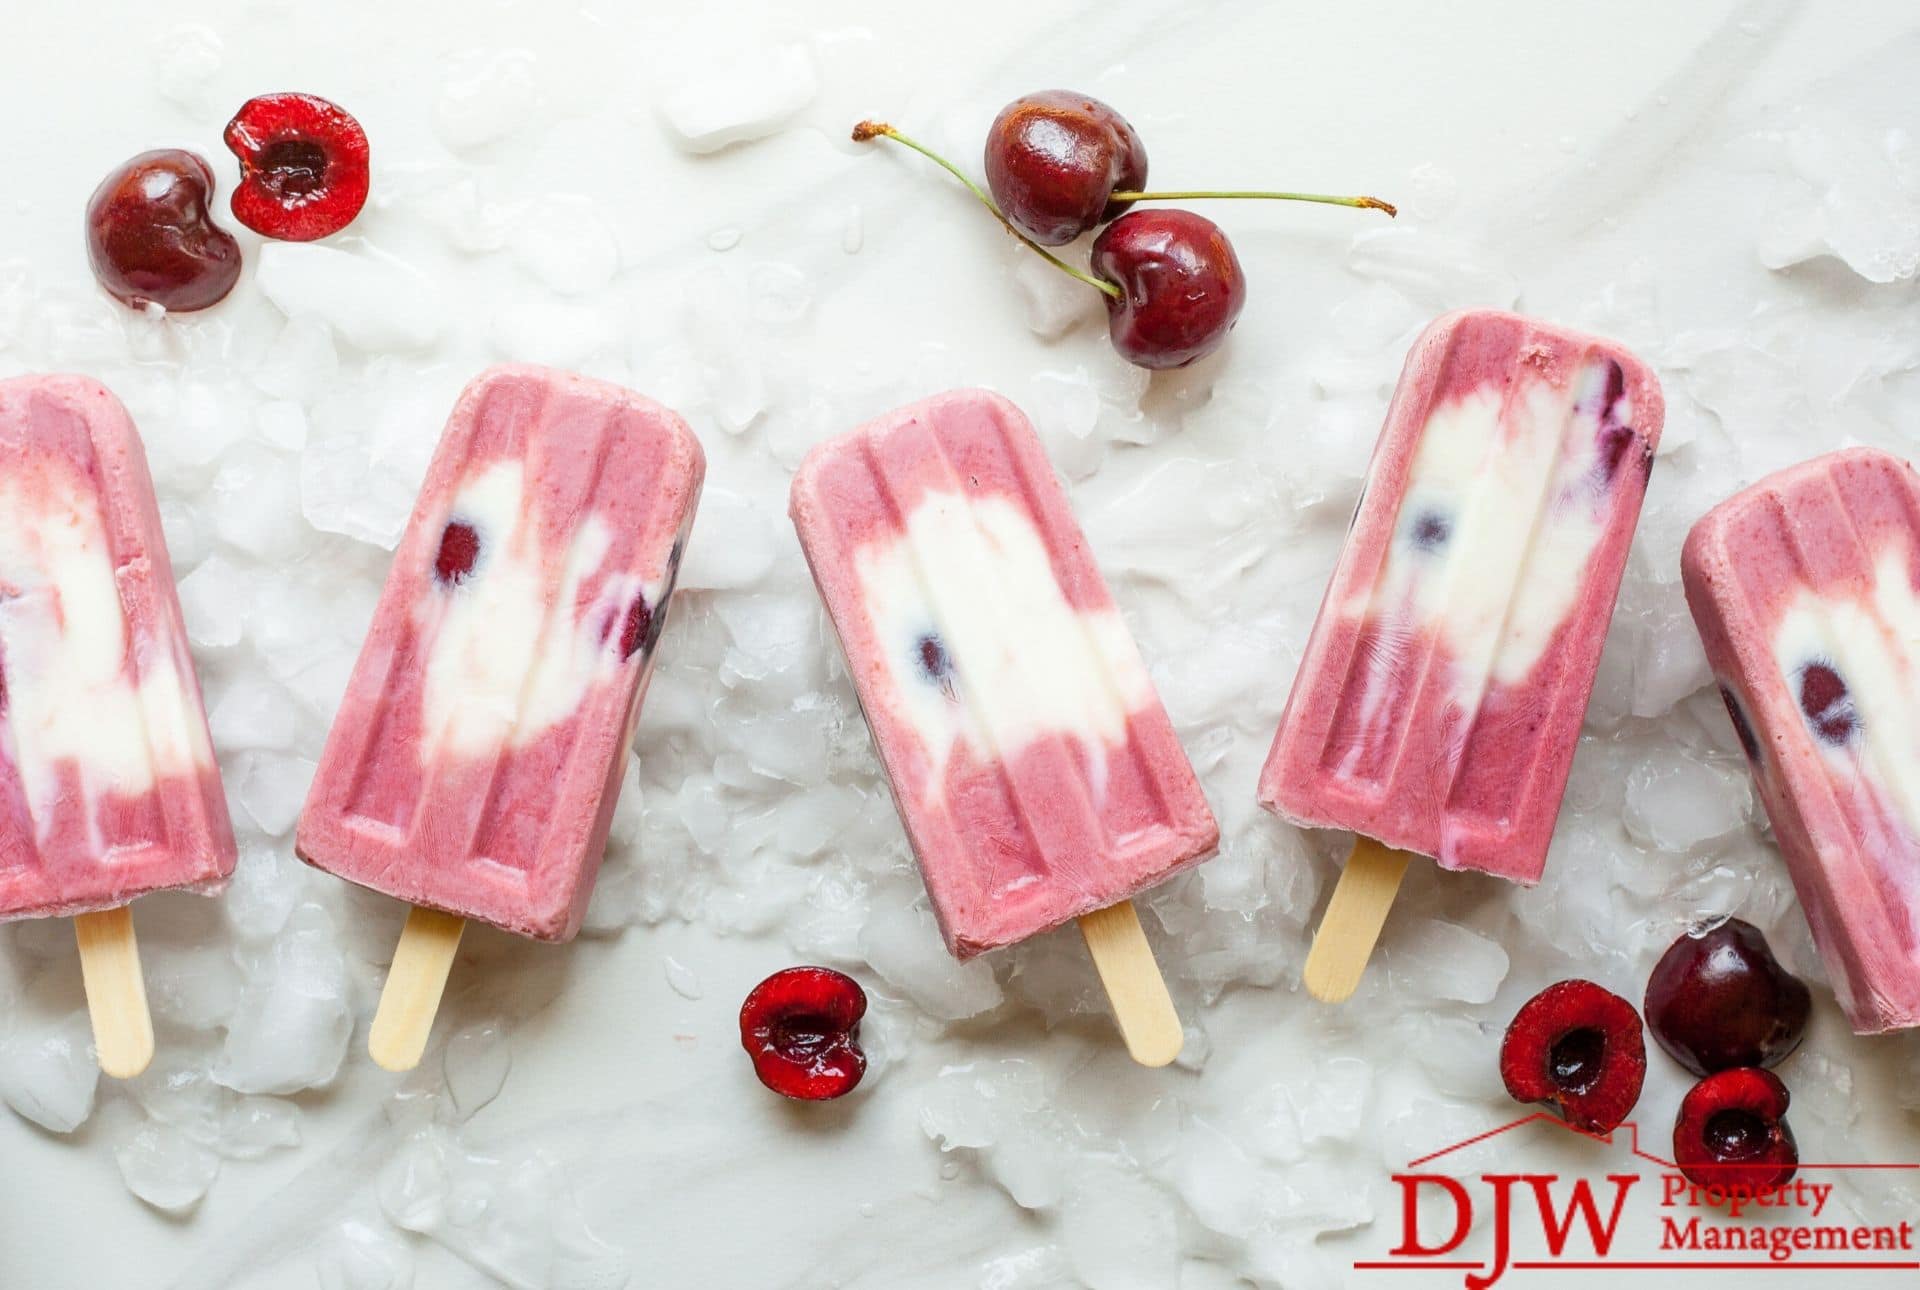 Pink popsicles and cherries on a marble countertop.